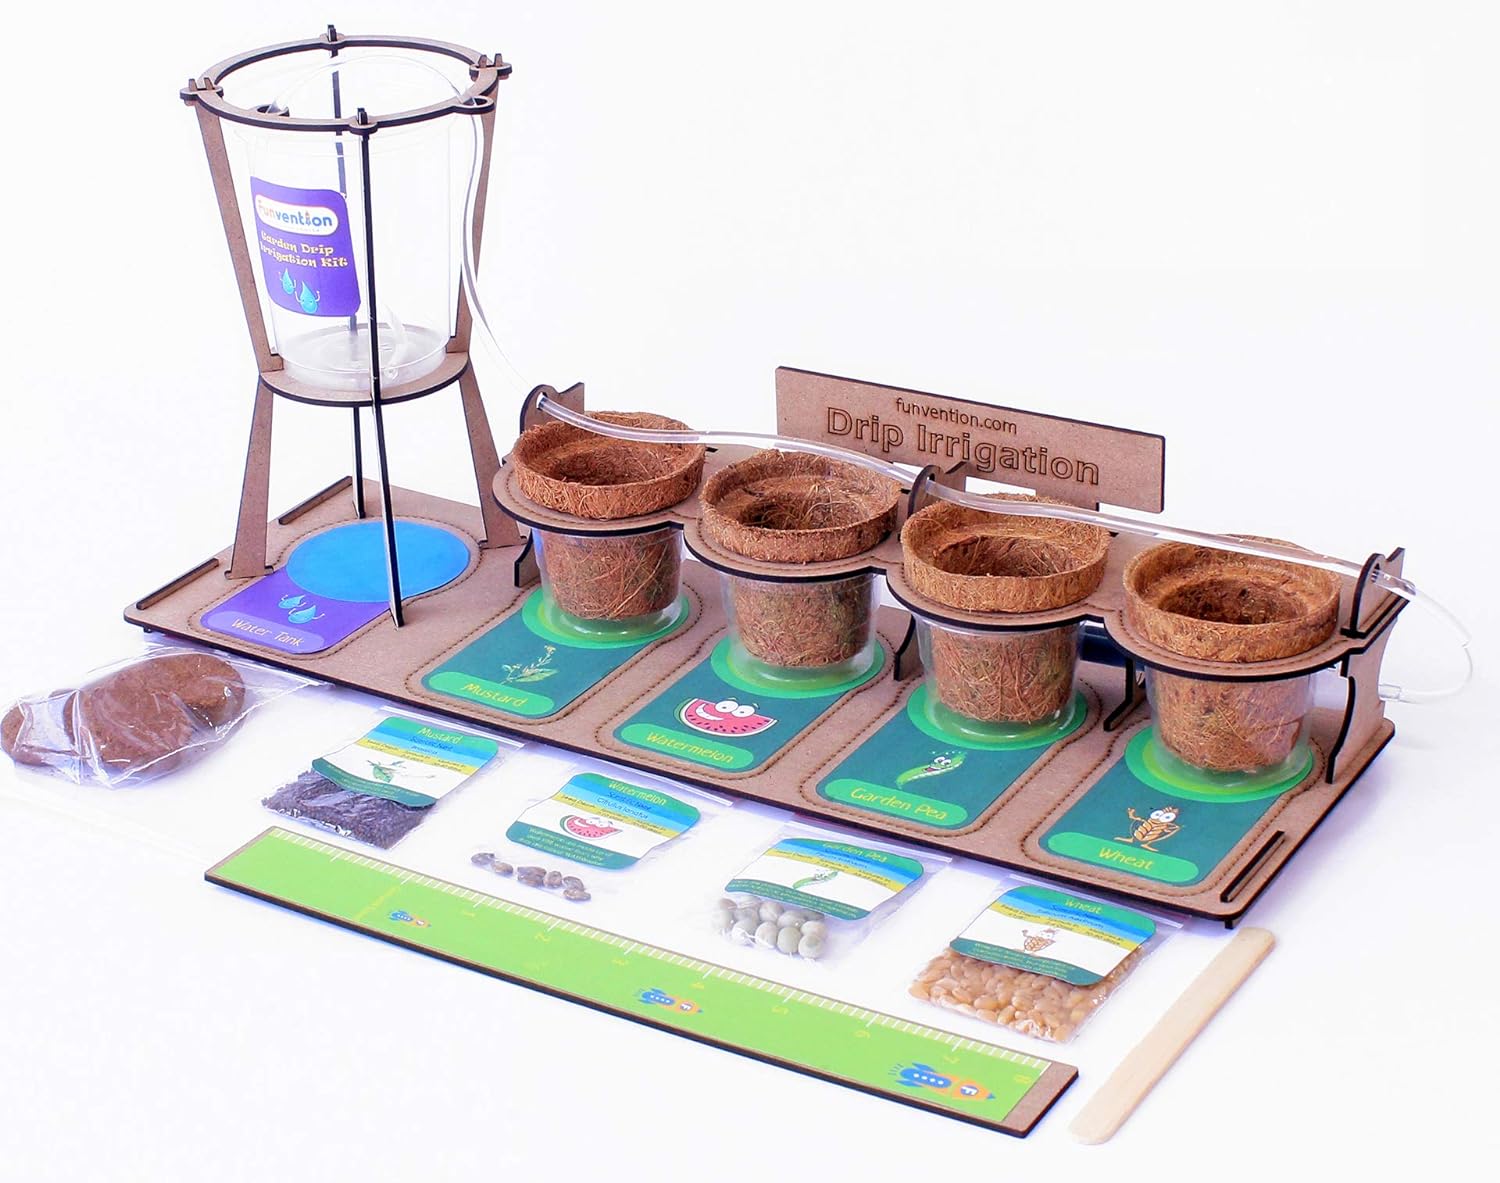 Funvention- for Little Scientist in Every Kid Garden Drip Irrigation Kit (Multicolour)